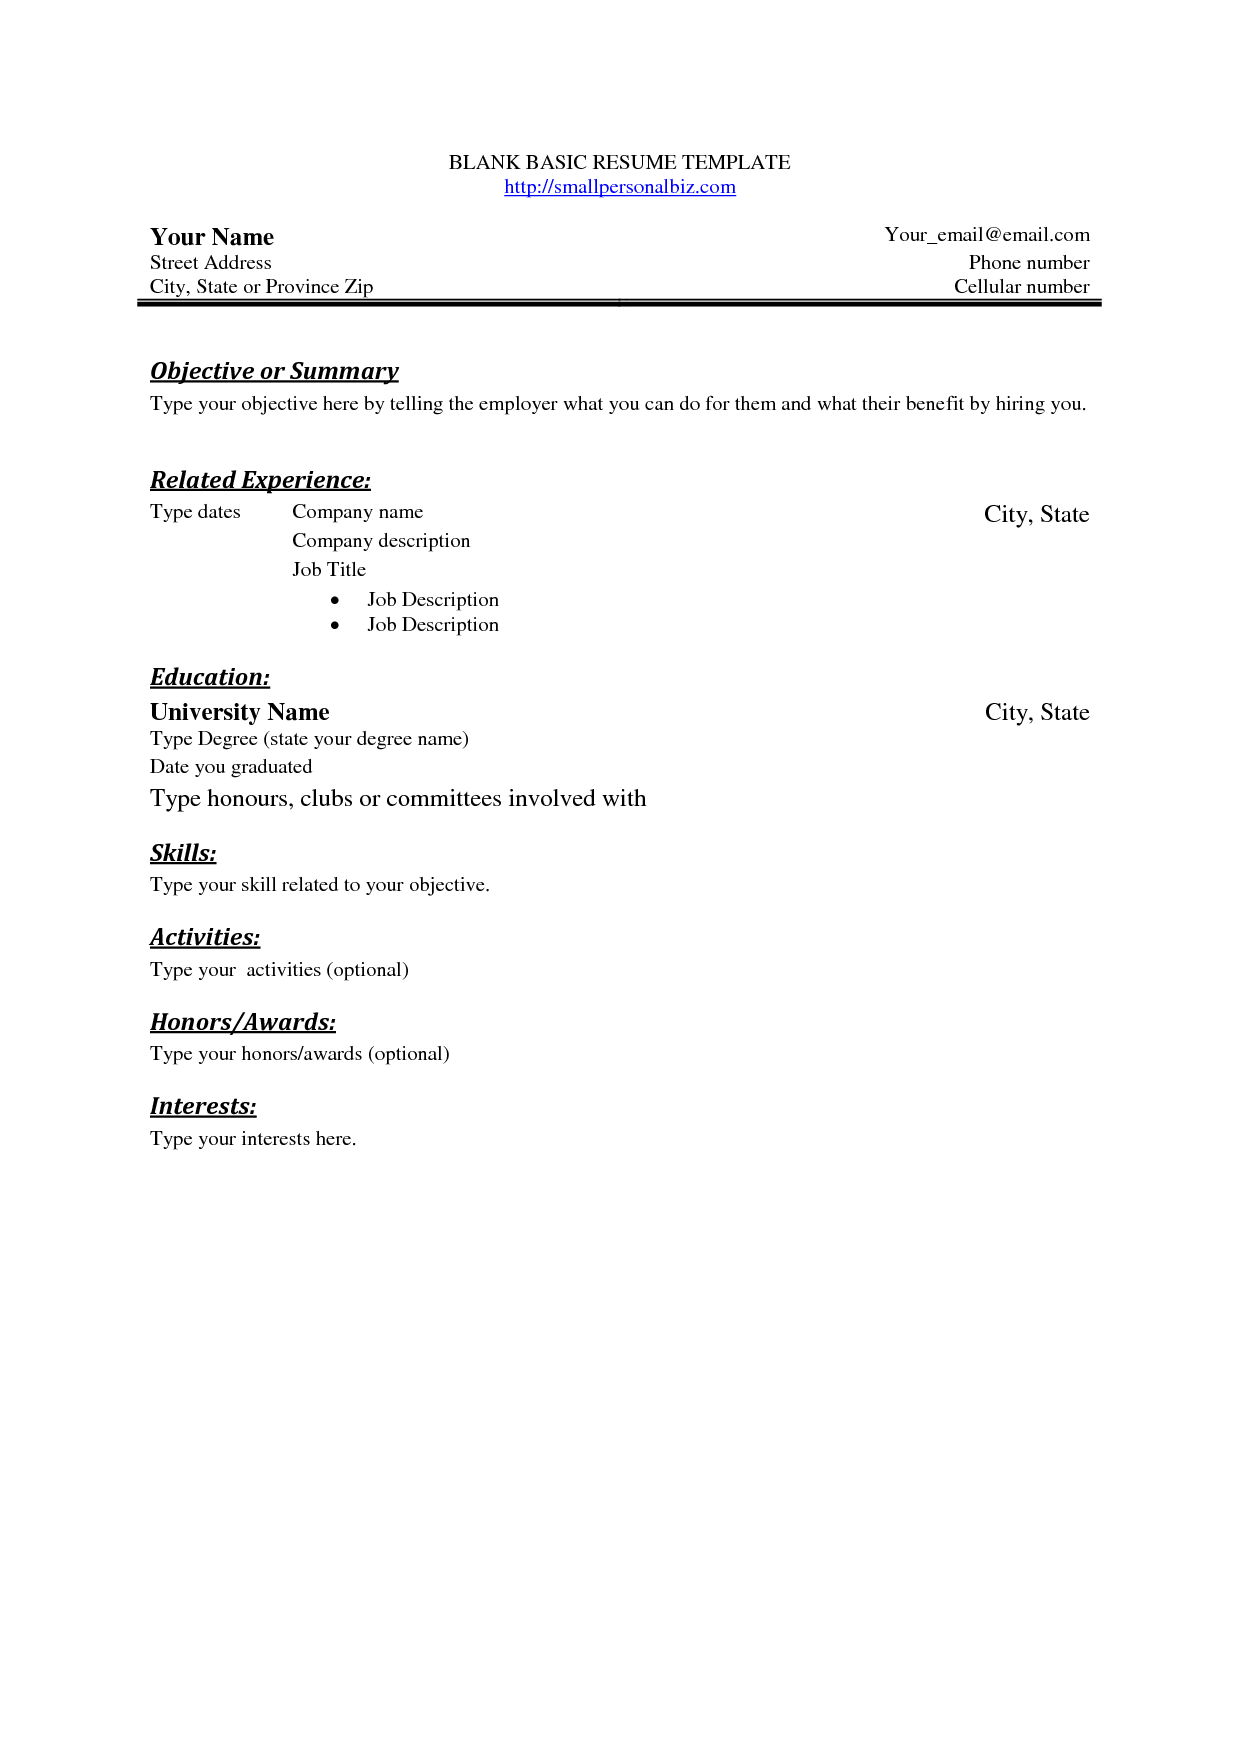 Resume ~ Stylist And Luxury Simpleesume Layout Free Basic Throughout Free Blank Resume Templates For Microsoft Word